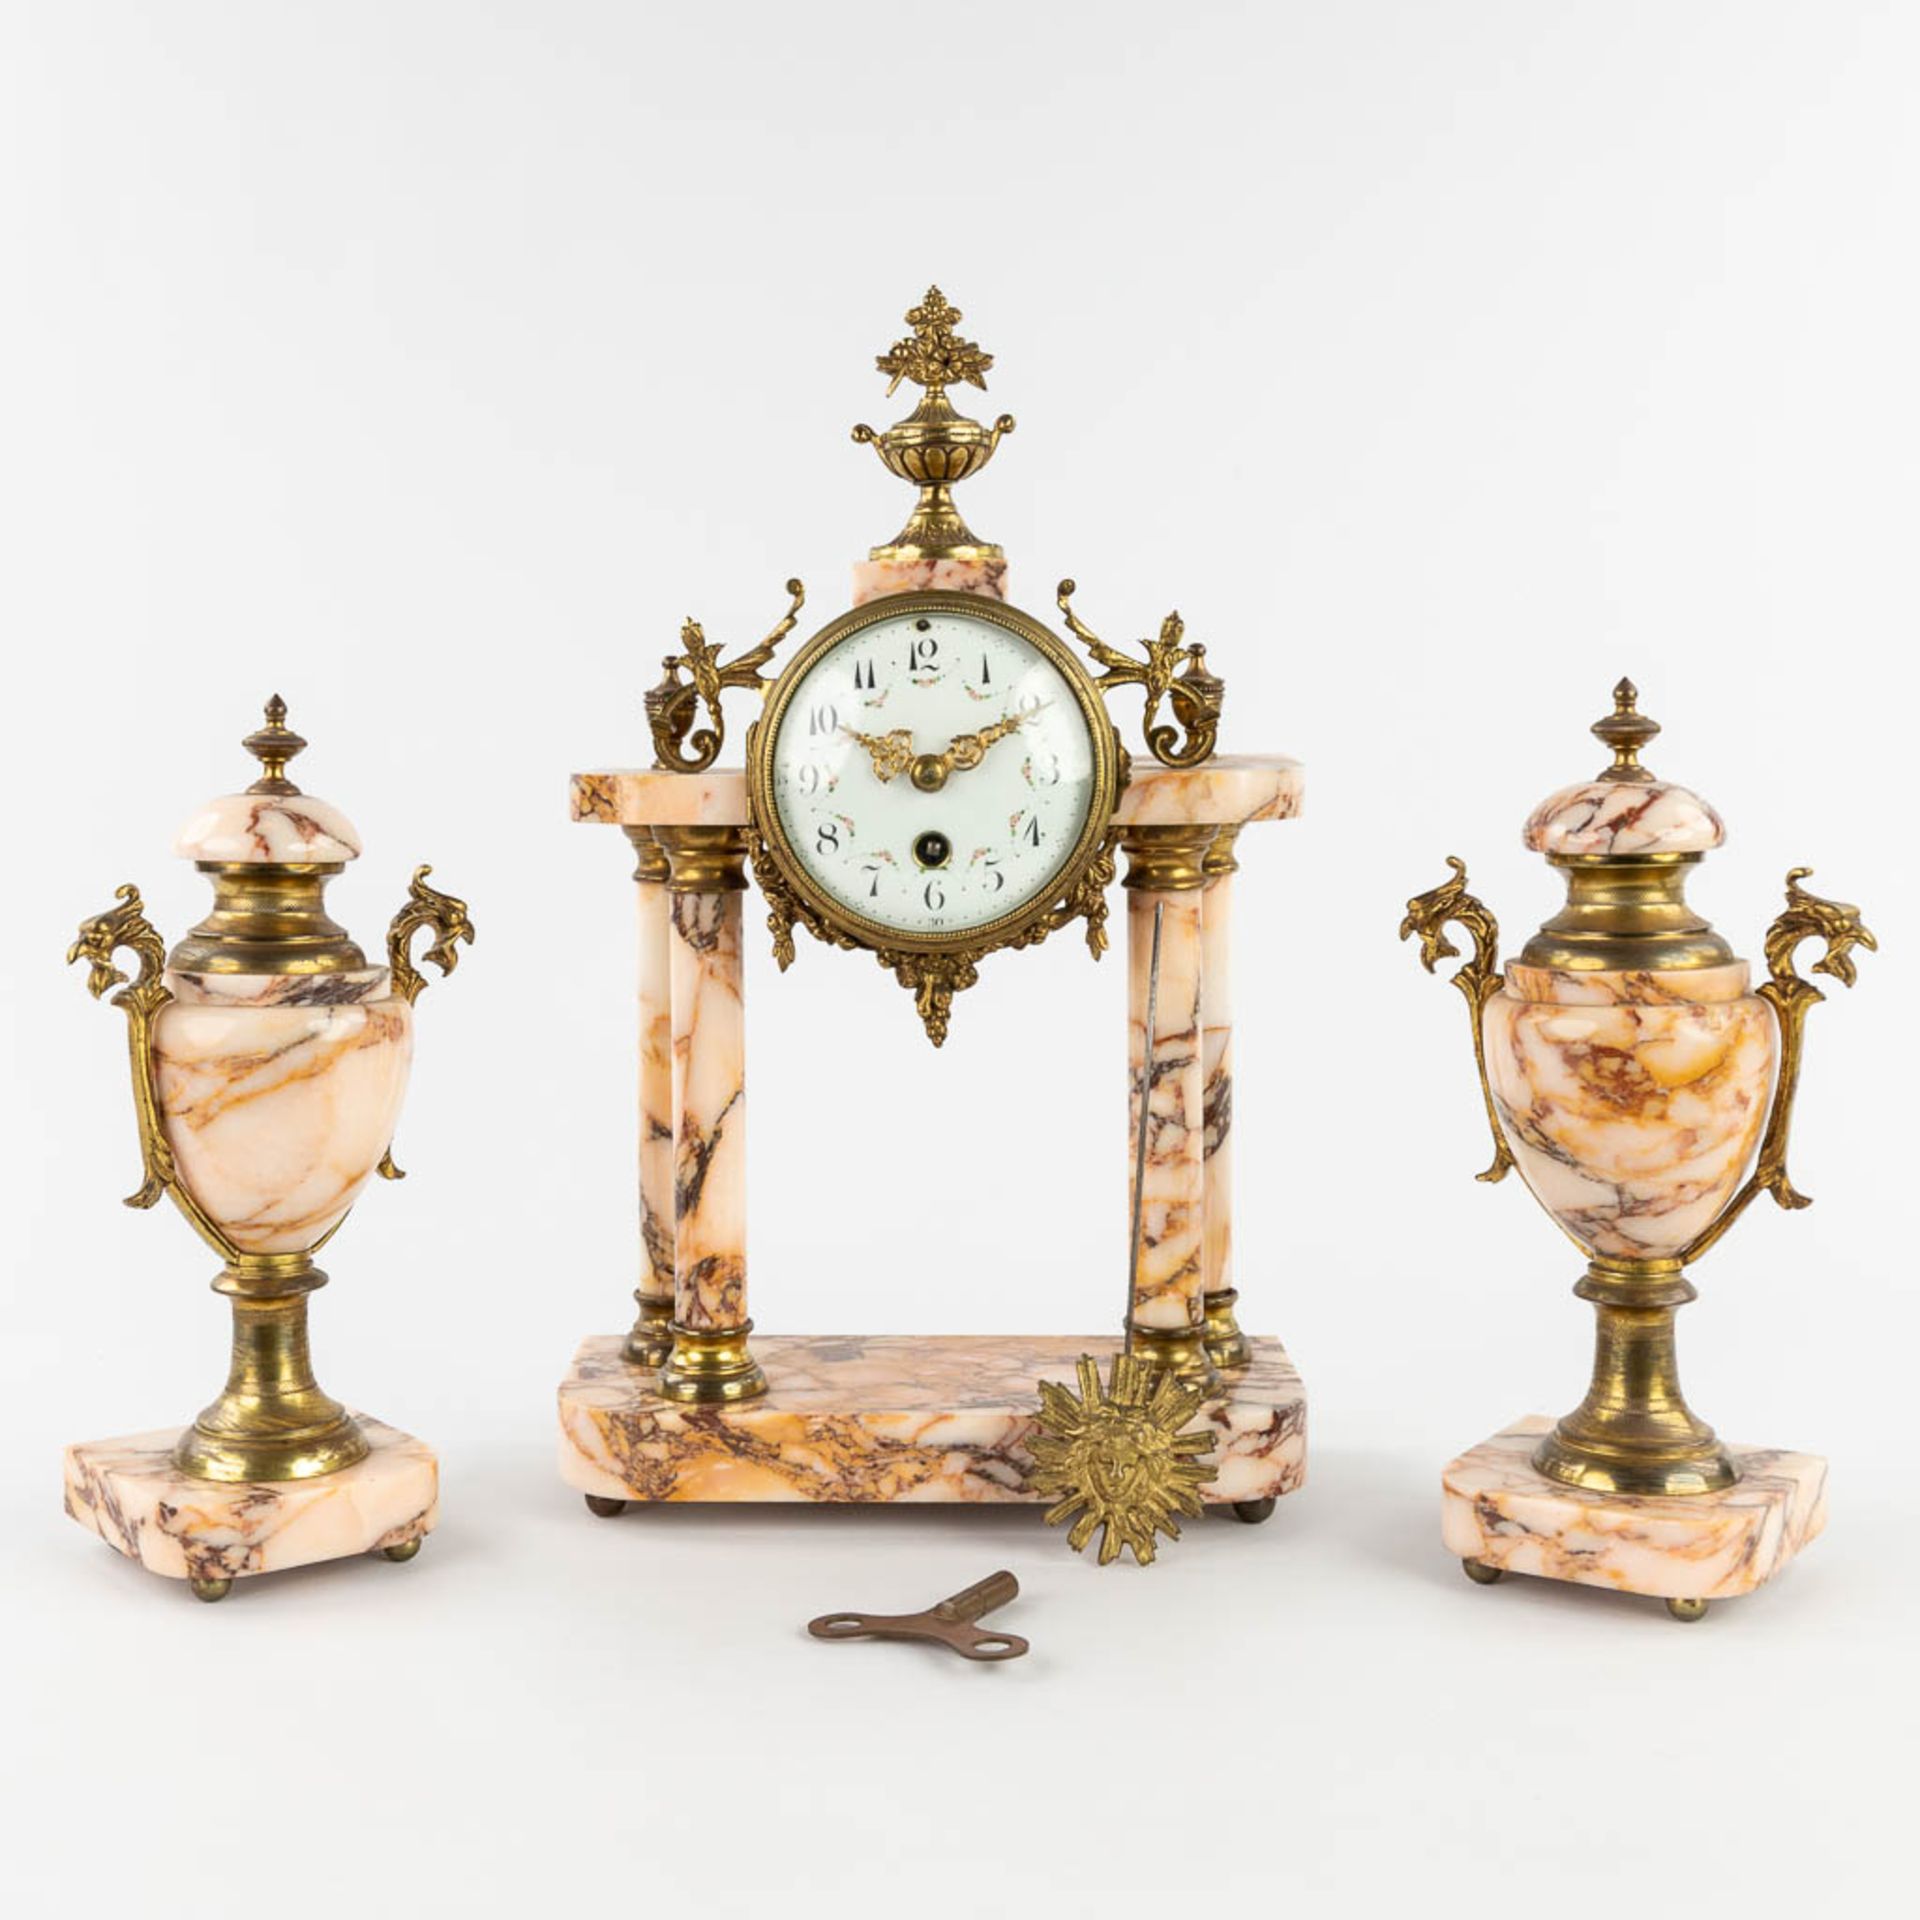 A three-piece mantle garniture, Clock with side pieces, marble mounted with bronze. Circa 1900. (L:1